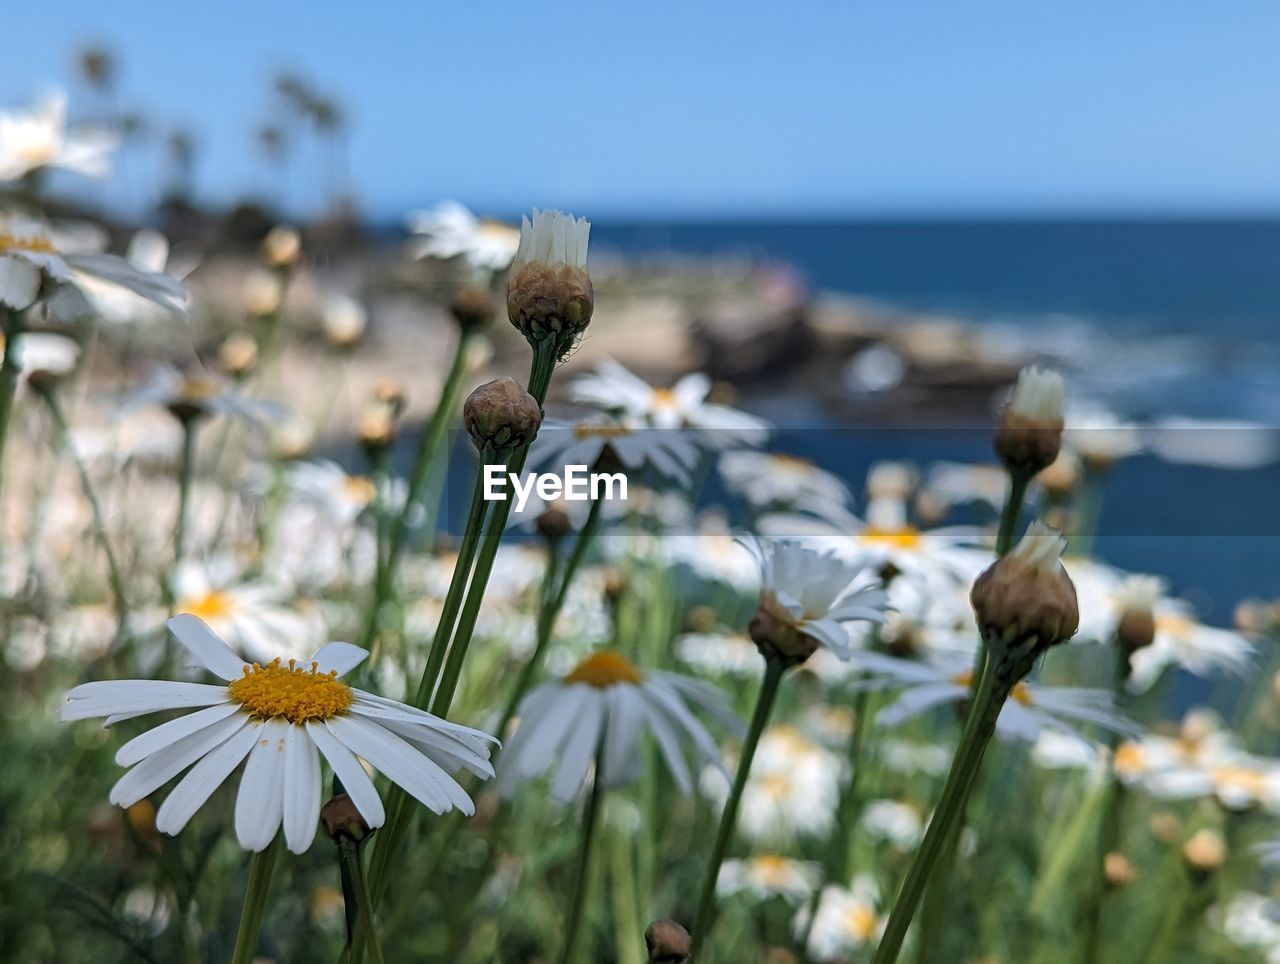 flower, flowering plant, plant, beauty in nature, nature, freshness, sky, water, land, close-up, focus on foreground, sea, no people, fragility, meadow, sunlight, field, growth, white, grass, daisy, day, flower head, tranquility, summer, wildflower, outdoors, springtime, clear sky, petal, environment, inflorescence, selective focus, scenics - nature, blossom, horizon, blue, macro photography, botany, beach, travel destinations, non-urban scene, landscape